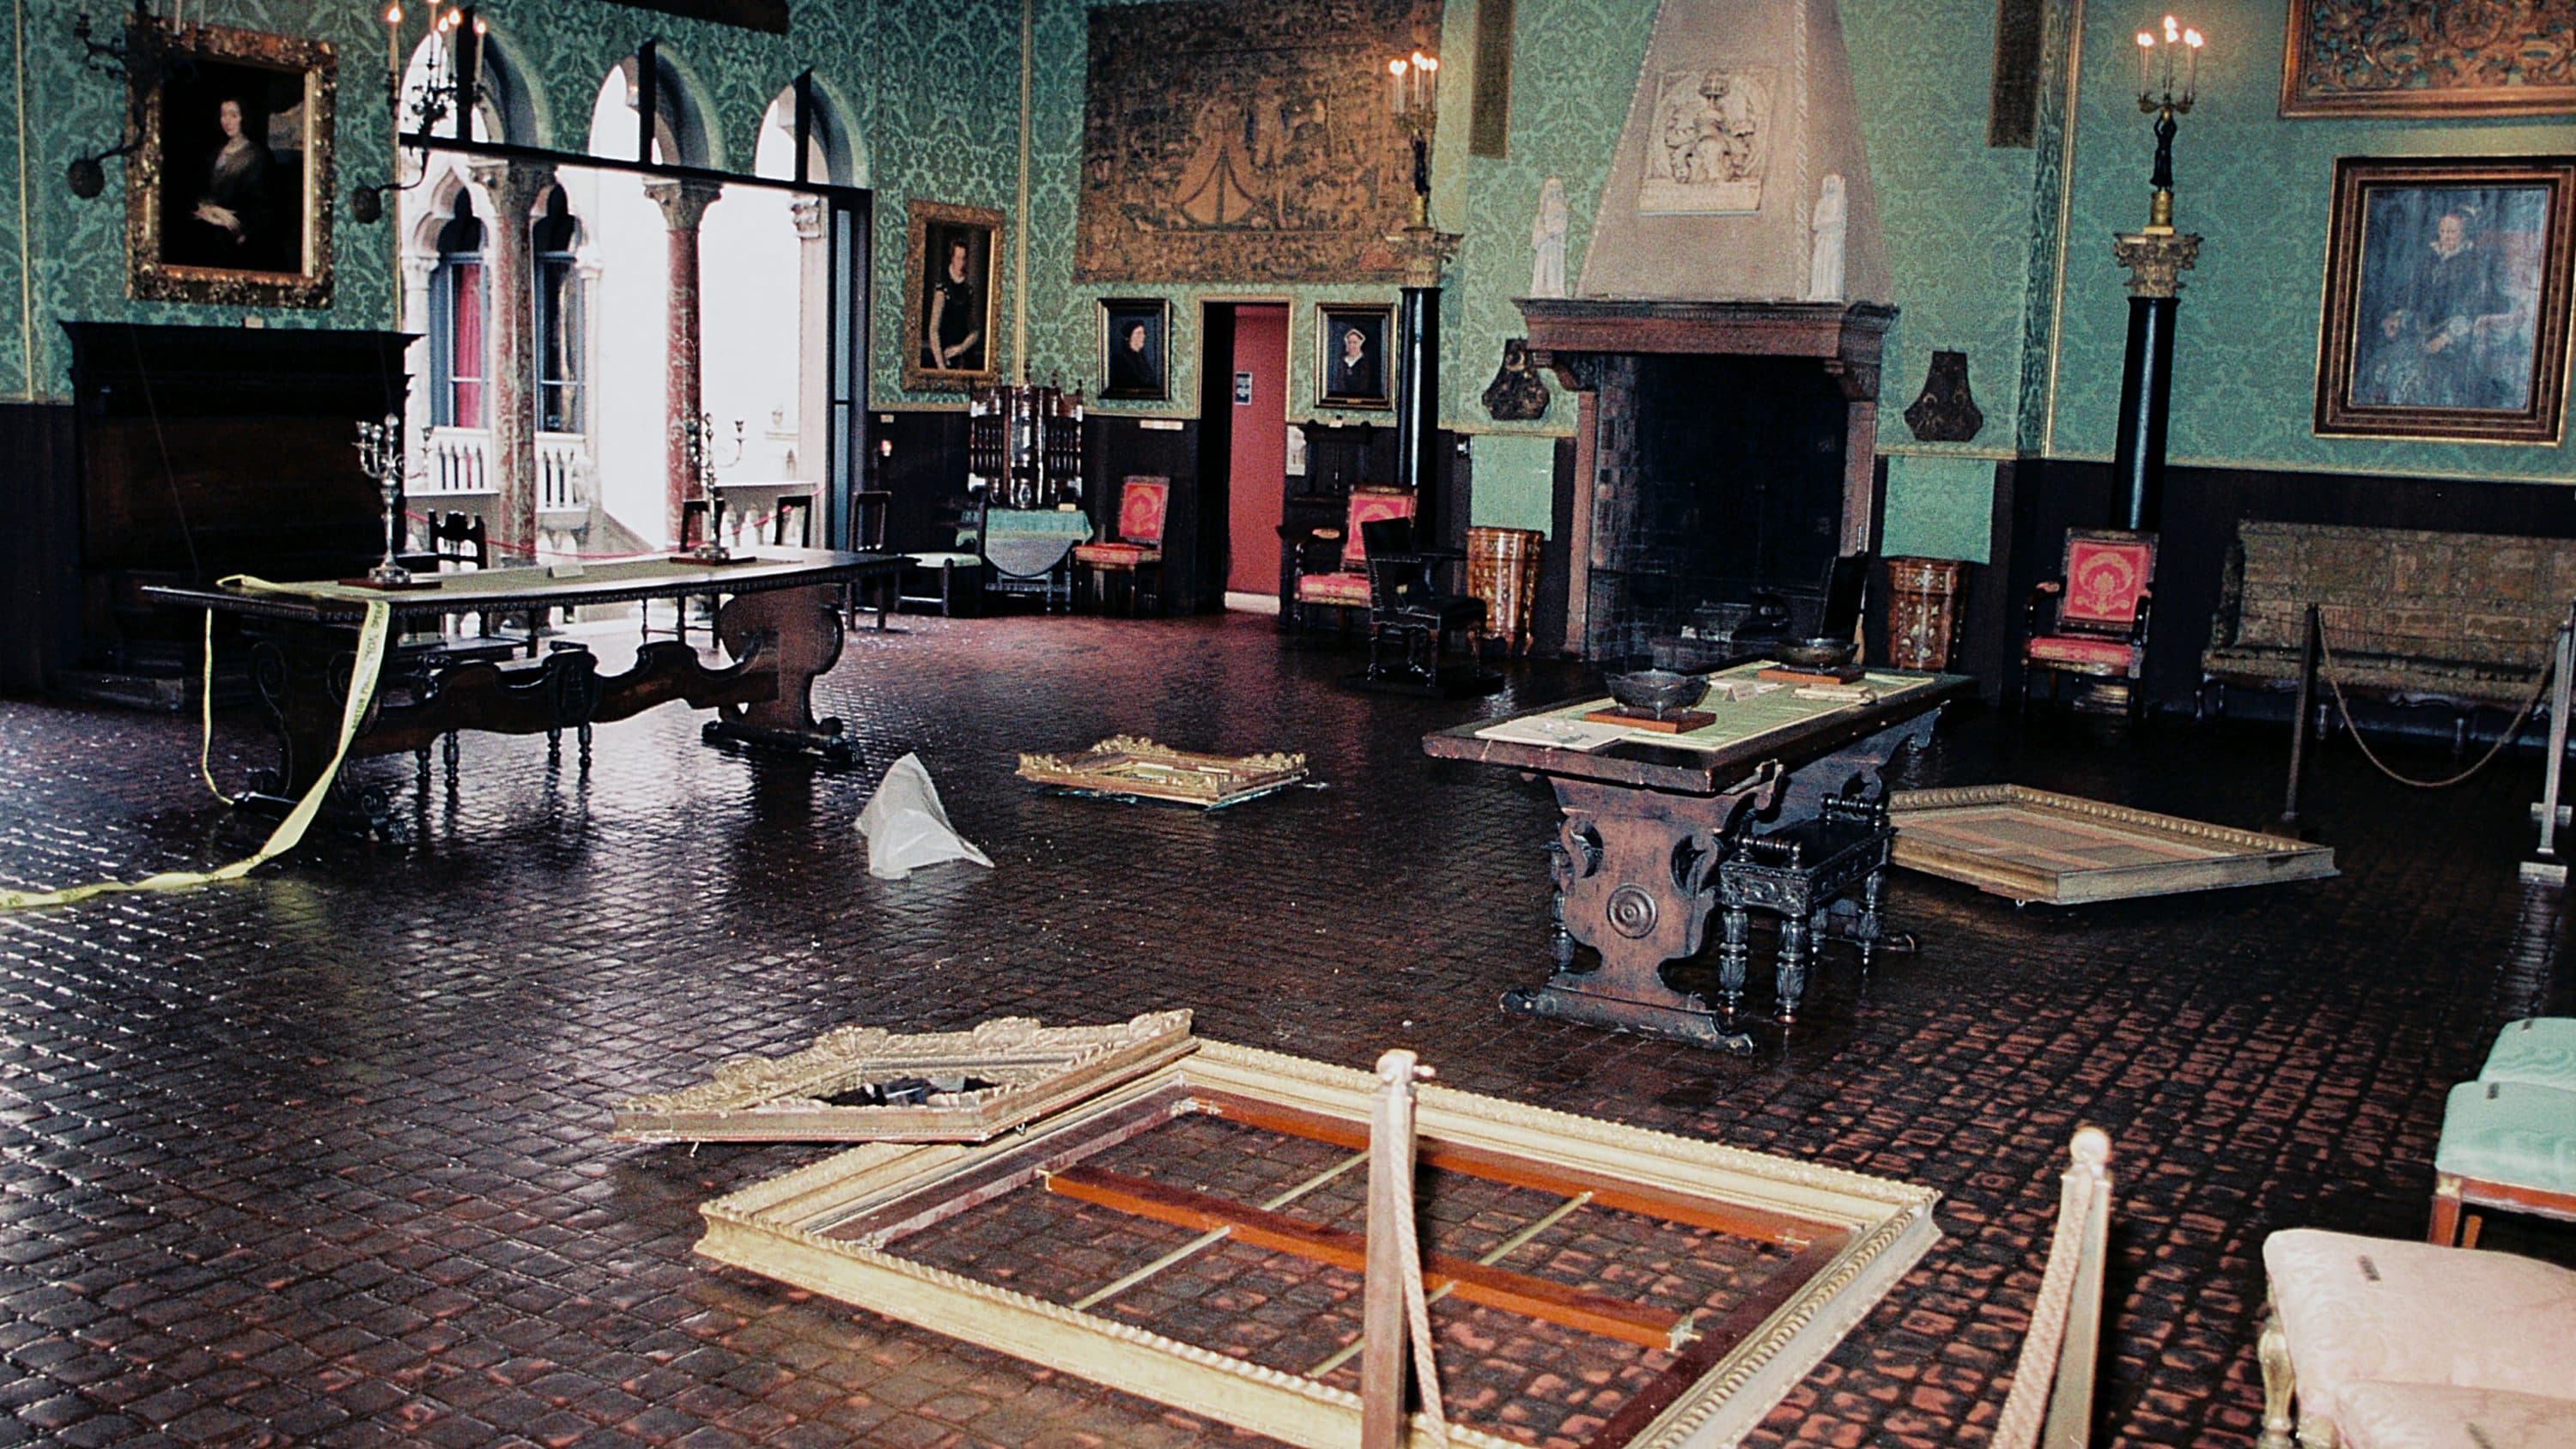 Inside the Isabella Stewart Gardner Museum after the robbery, as seen on &quot;This Is a Robbery: The World's Biggest Art Heist.&quot; (Courtesy of Netflix)